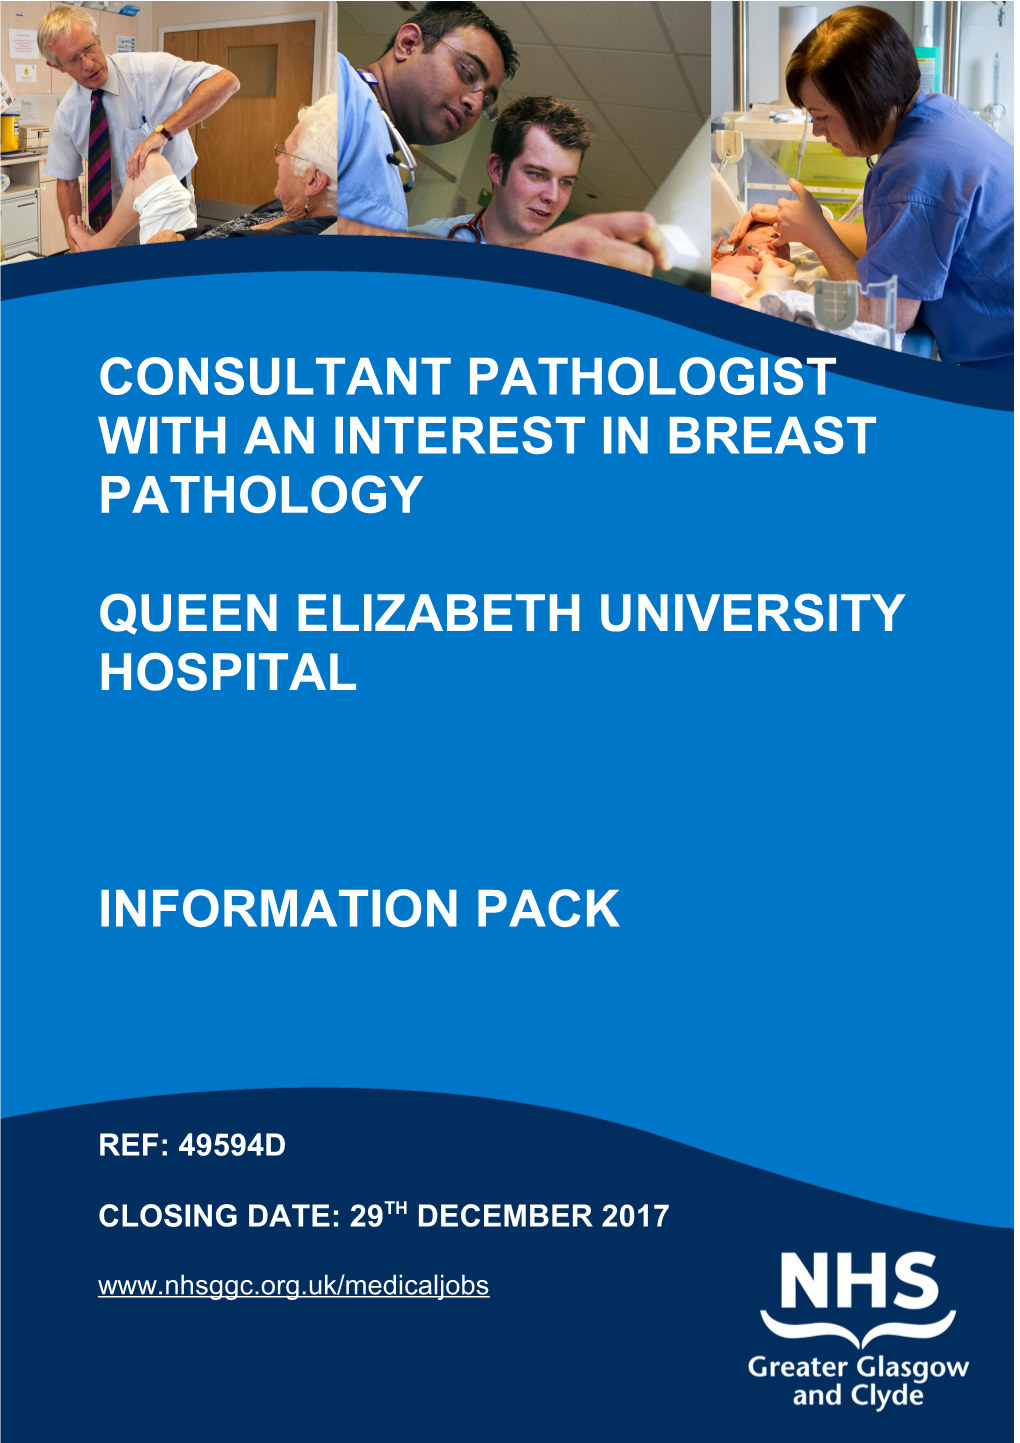 With an Interest in Breast Pathology